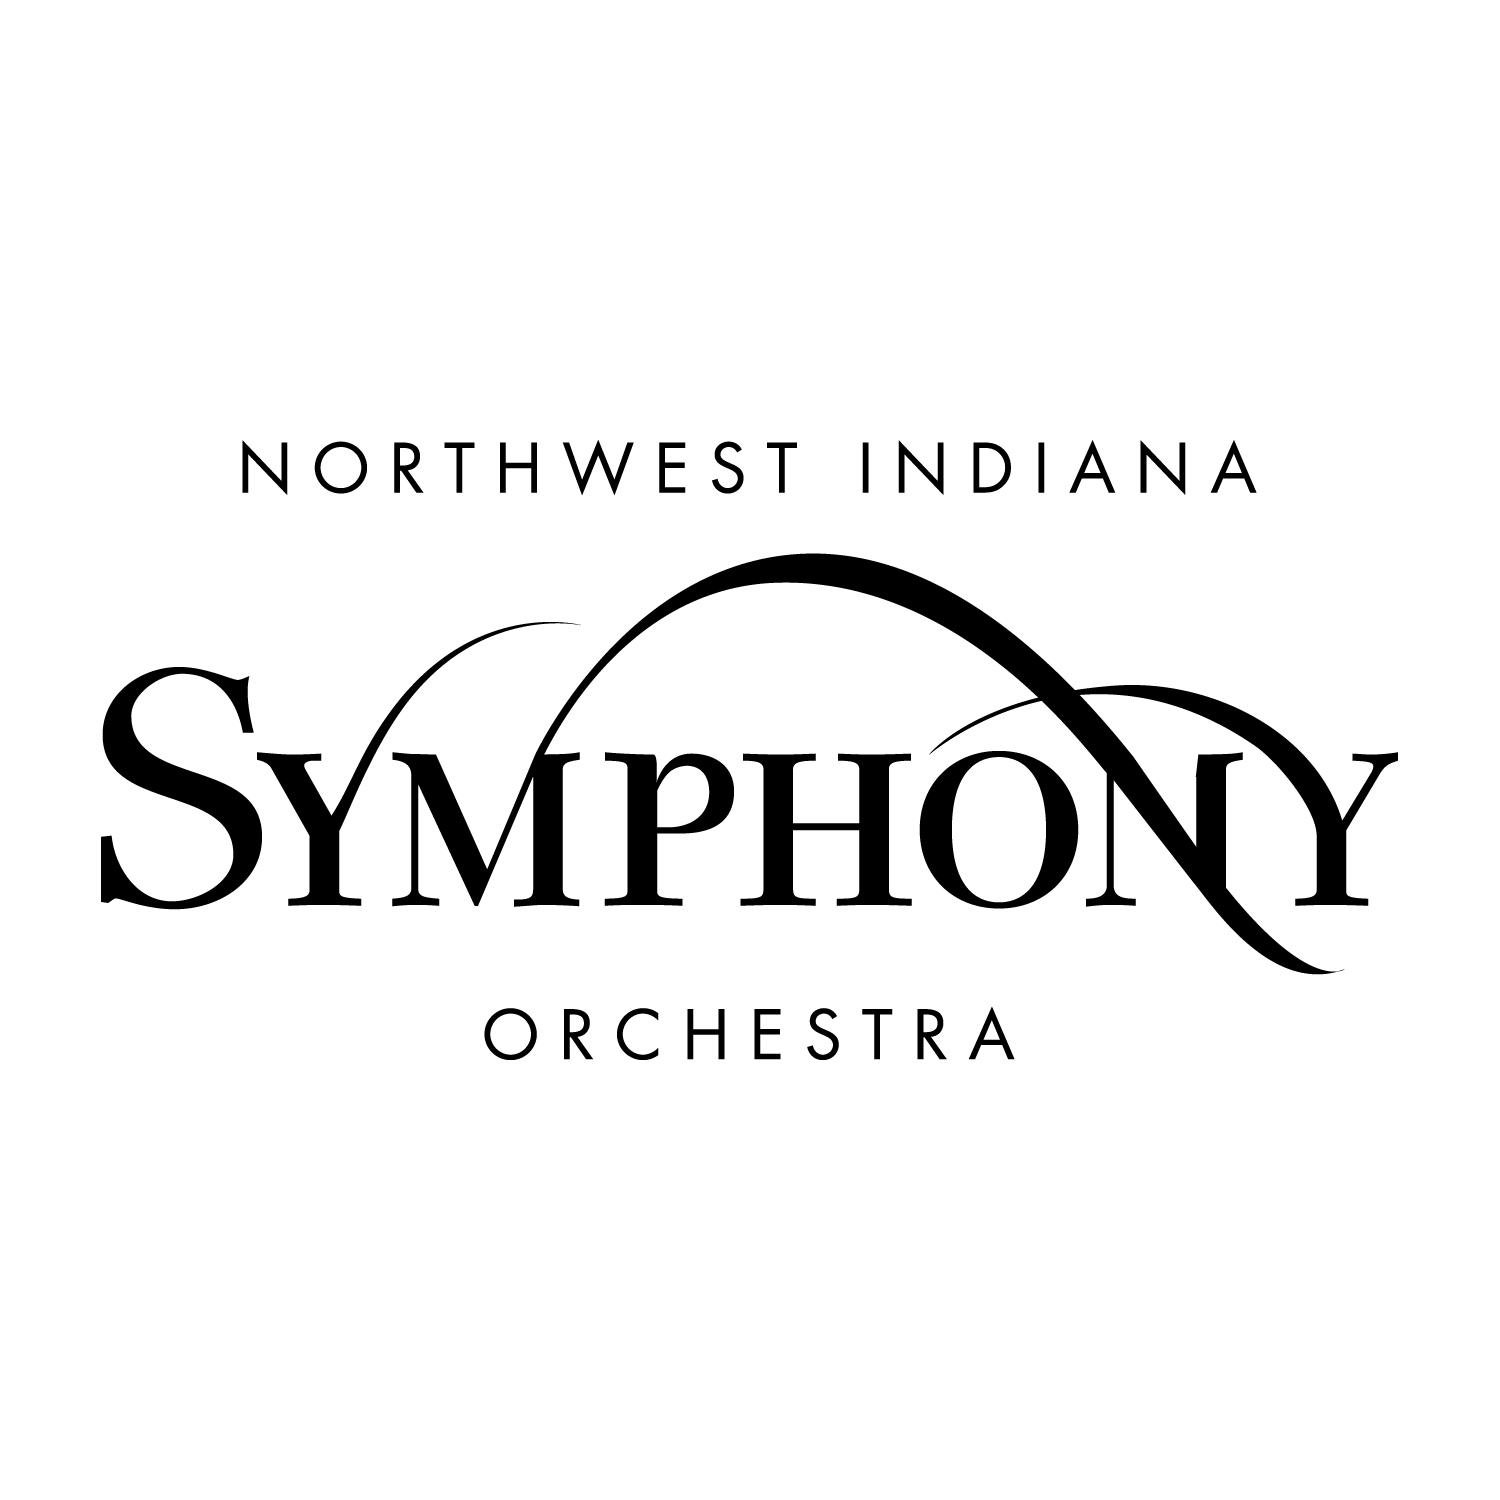 The Symphony is comprised of the Symphony Orchestra, the  Symphony Youth Orchestra, the  Symphony Chorus, and the Women's Association.